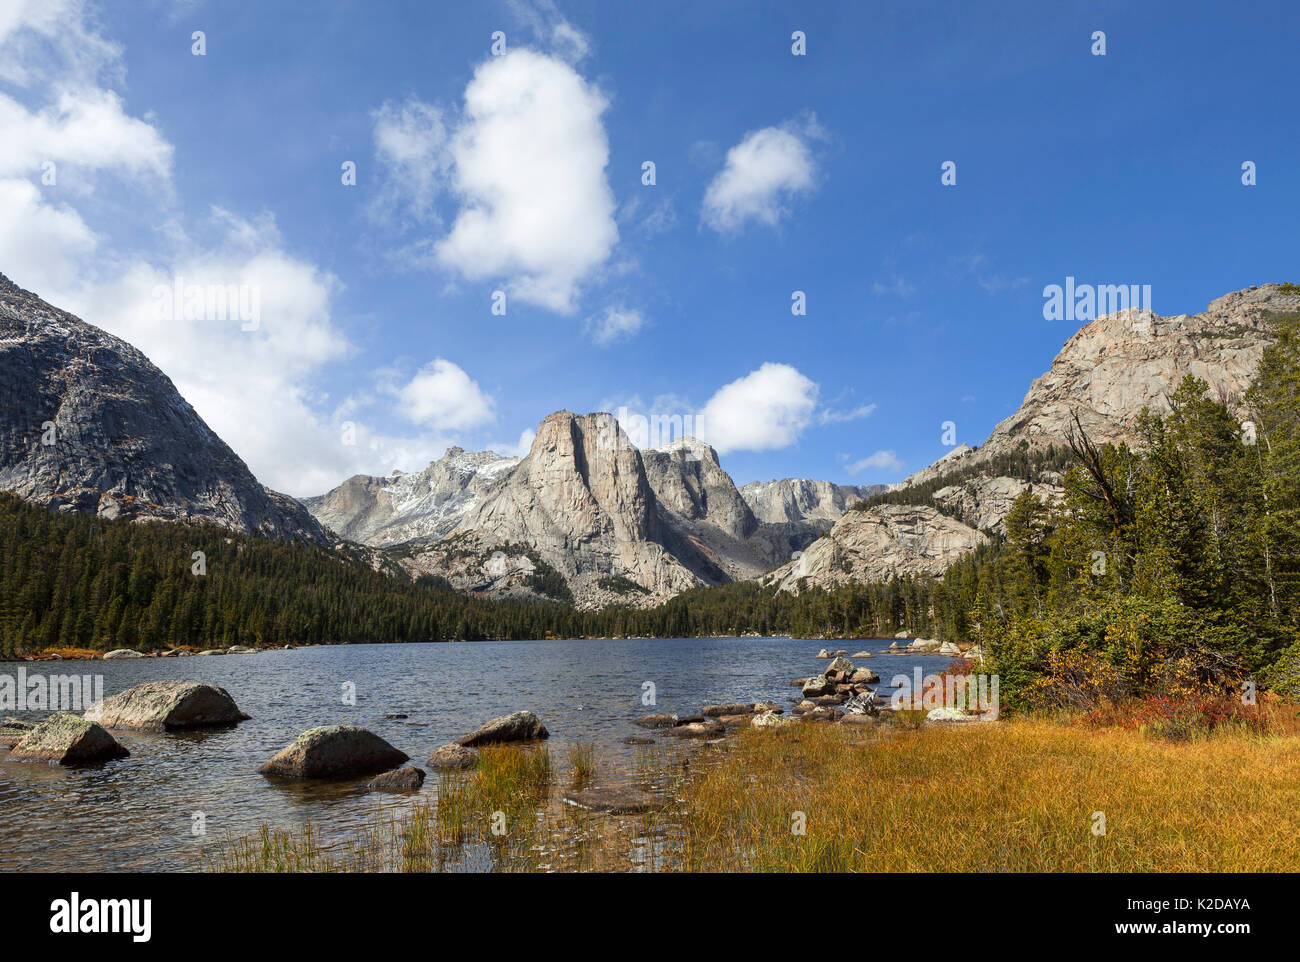 Cathedral Peak from Middle Lake, Popo Agie Wilderness, Wind River Range, Shoshone National Forest, Wyoming, USA. September 2015. Stock Photo